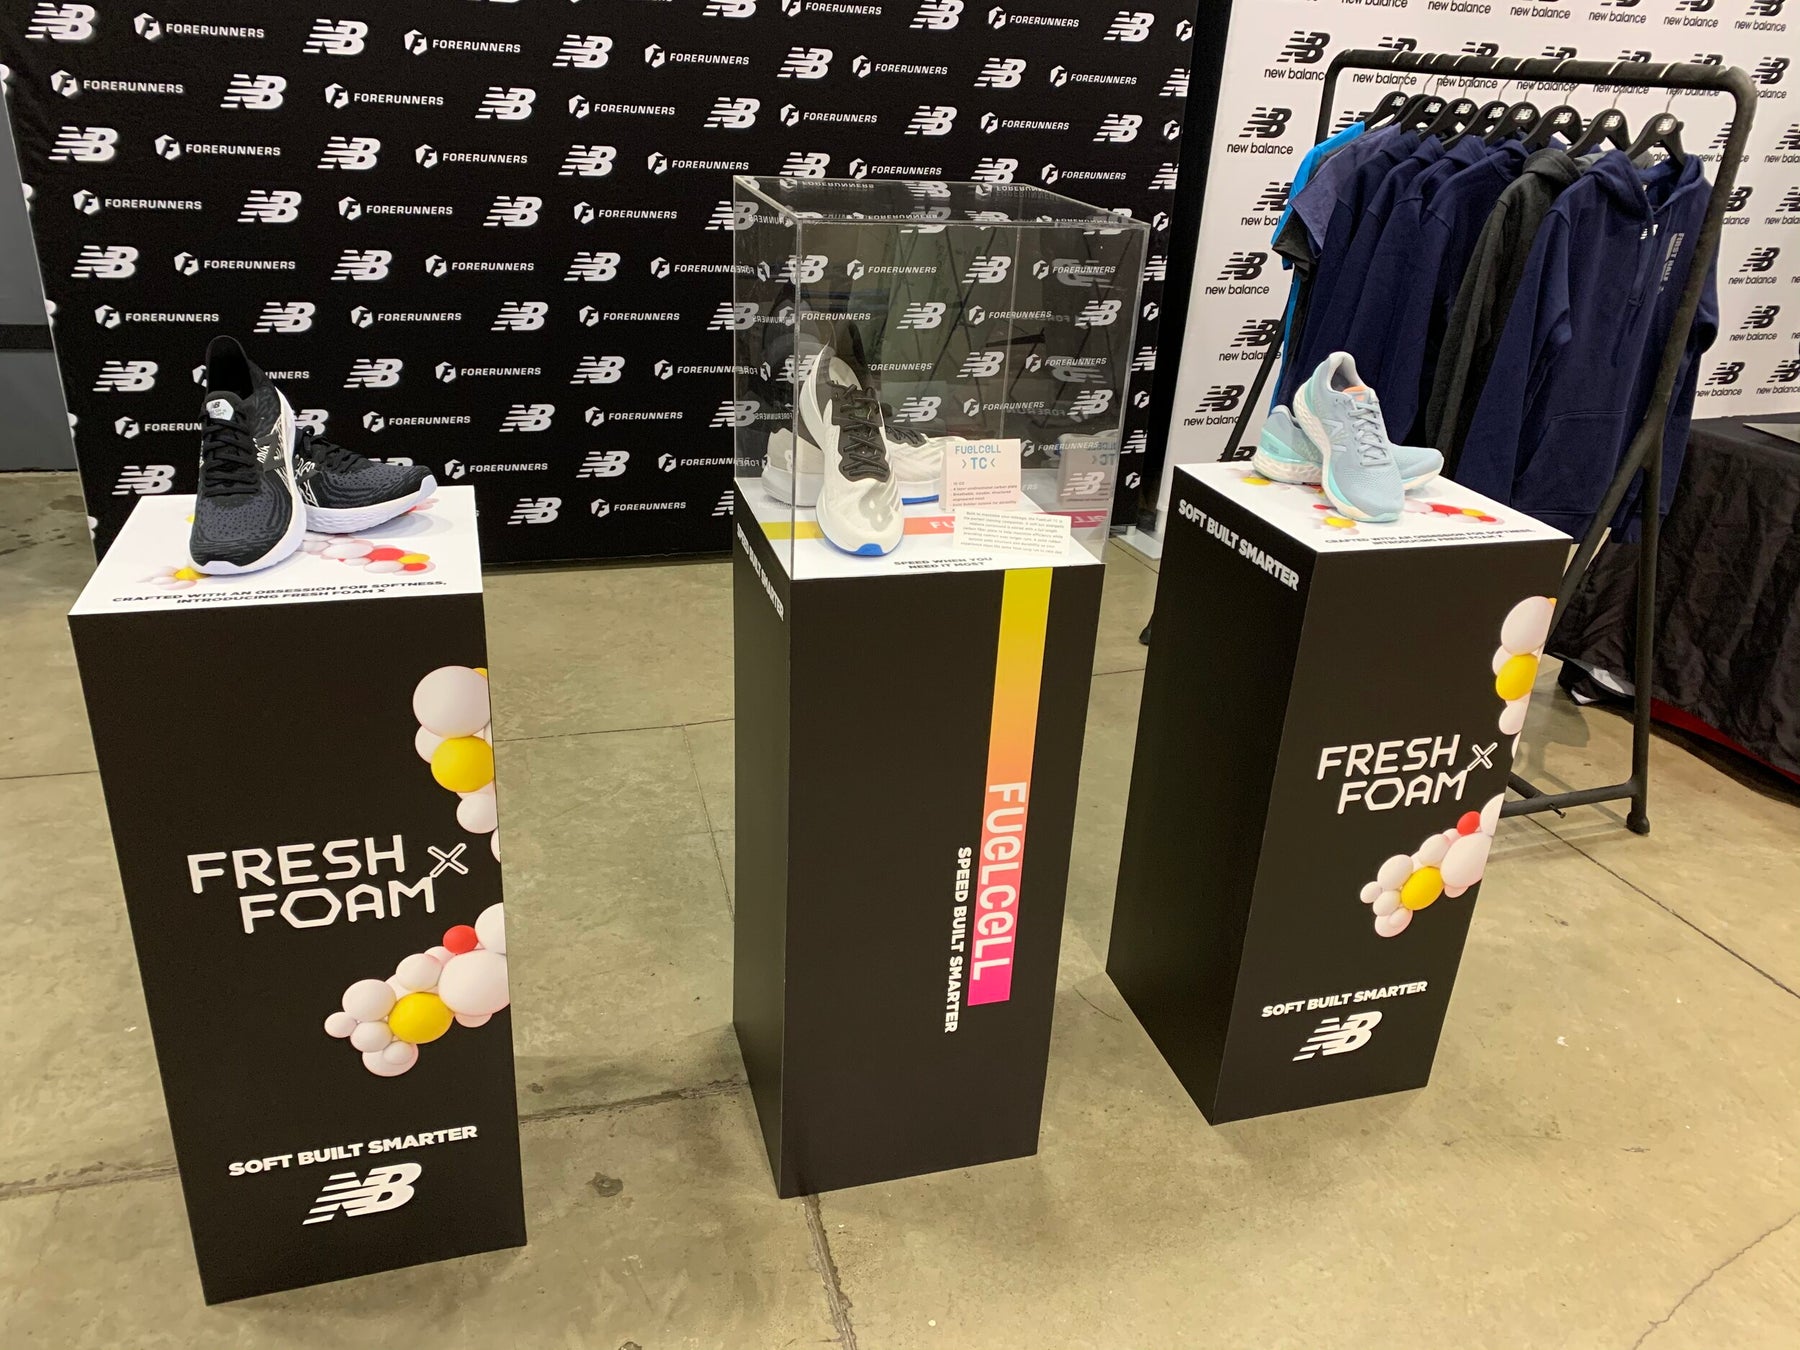 Plinth Boxes (MDO) and fabric tension banners for New Balance